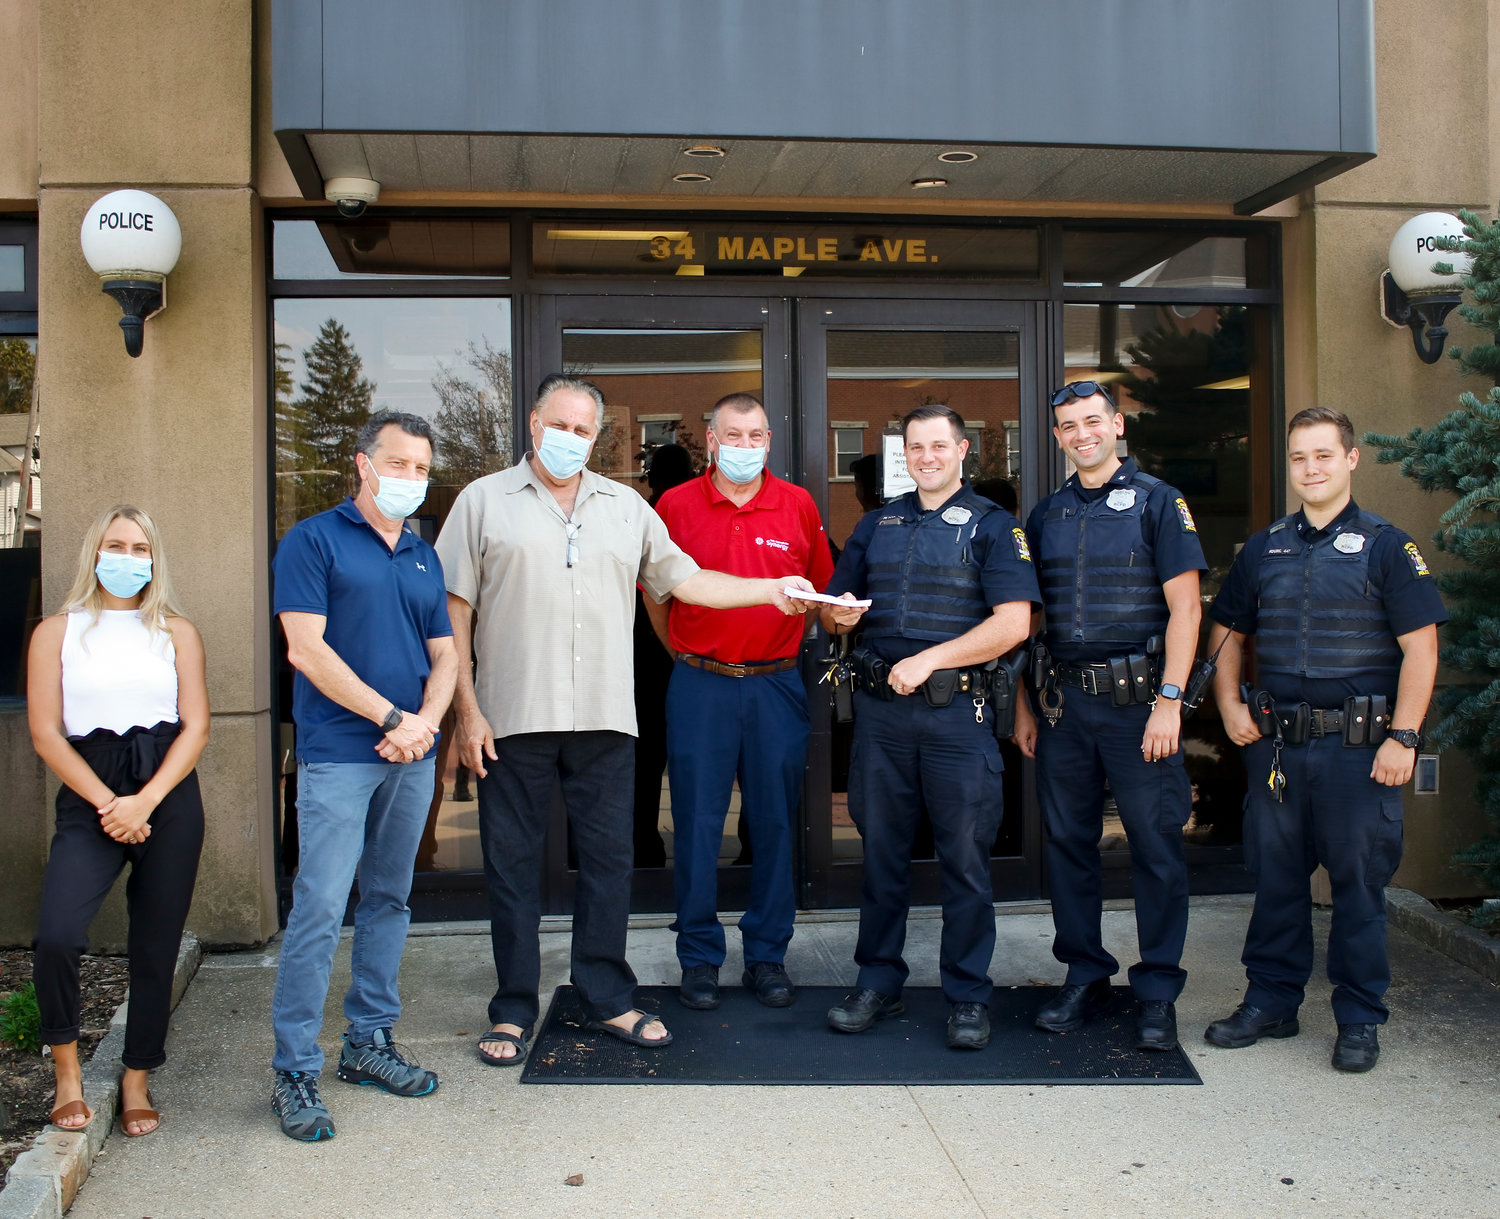 Anton's Car Care Center and Herald Community Newspapers donated a $15 gas coupon to every officer of the Rockville Centre Police Department on Aug. 28. Courtney Myers, Event Coordinator, left and Stuart Richner, Publisher, from Herald Community Newspapers, Anton Parisi, President and Harry Redes, Vice President from Anton's Car Care Center with RVCPD Officers, from left, Ron Flood, Chris Martins and Phil Kouril outside of Police Headquarters on Maple Ave.